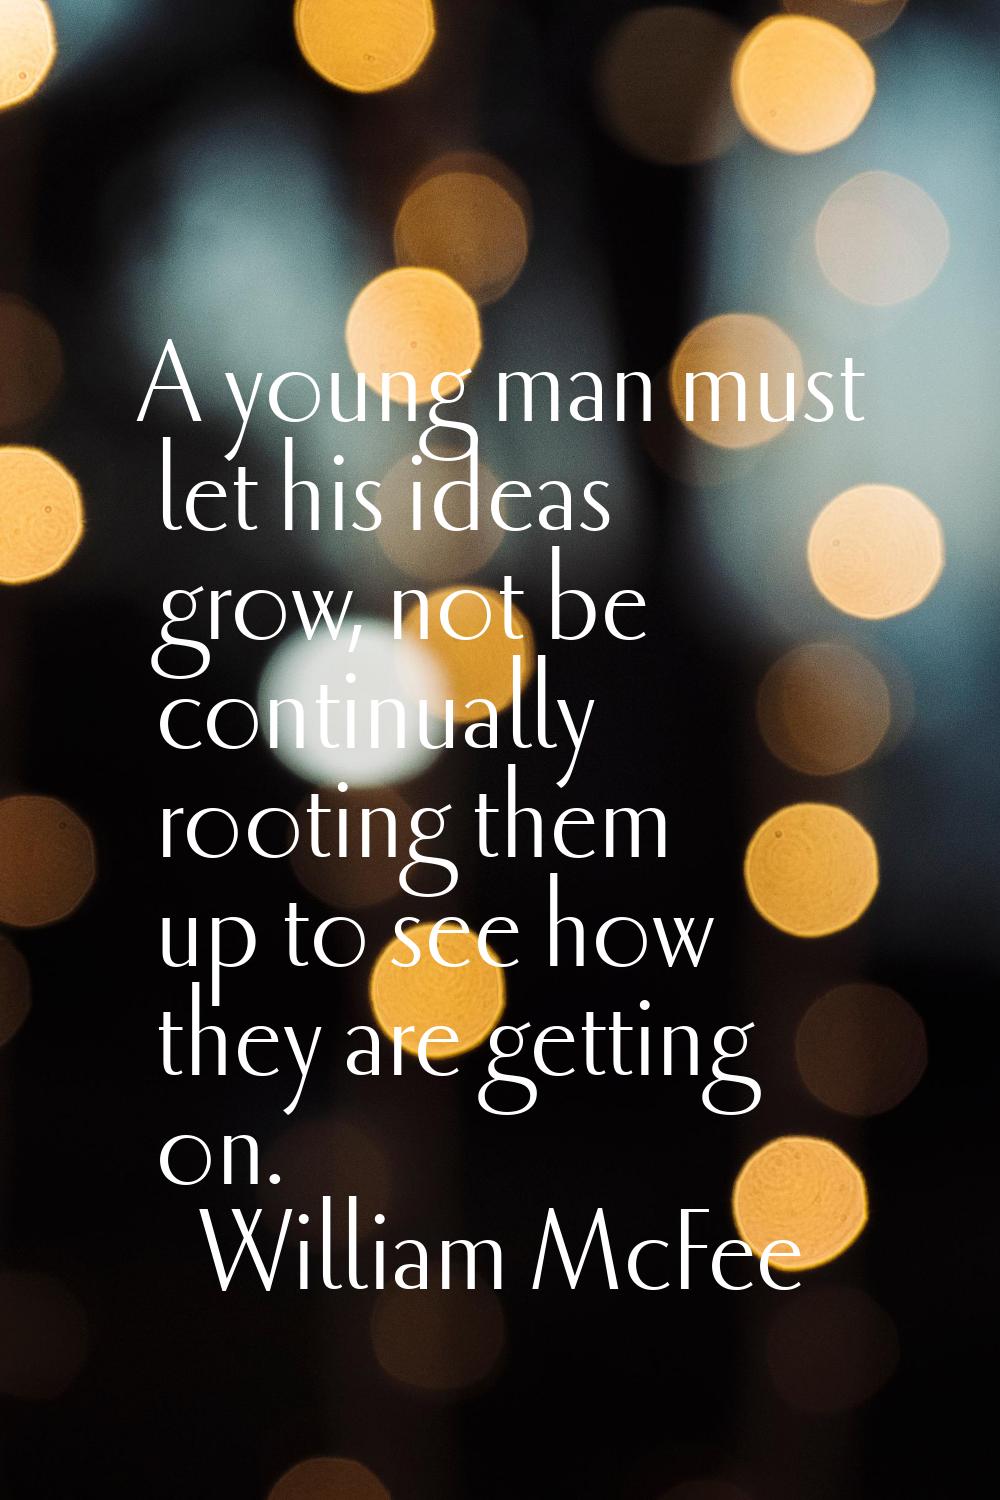 A young man must let his ideas grow, not be continually rooting them up to see how they are getting